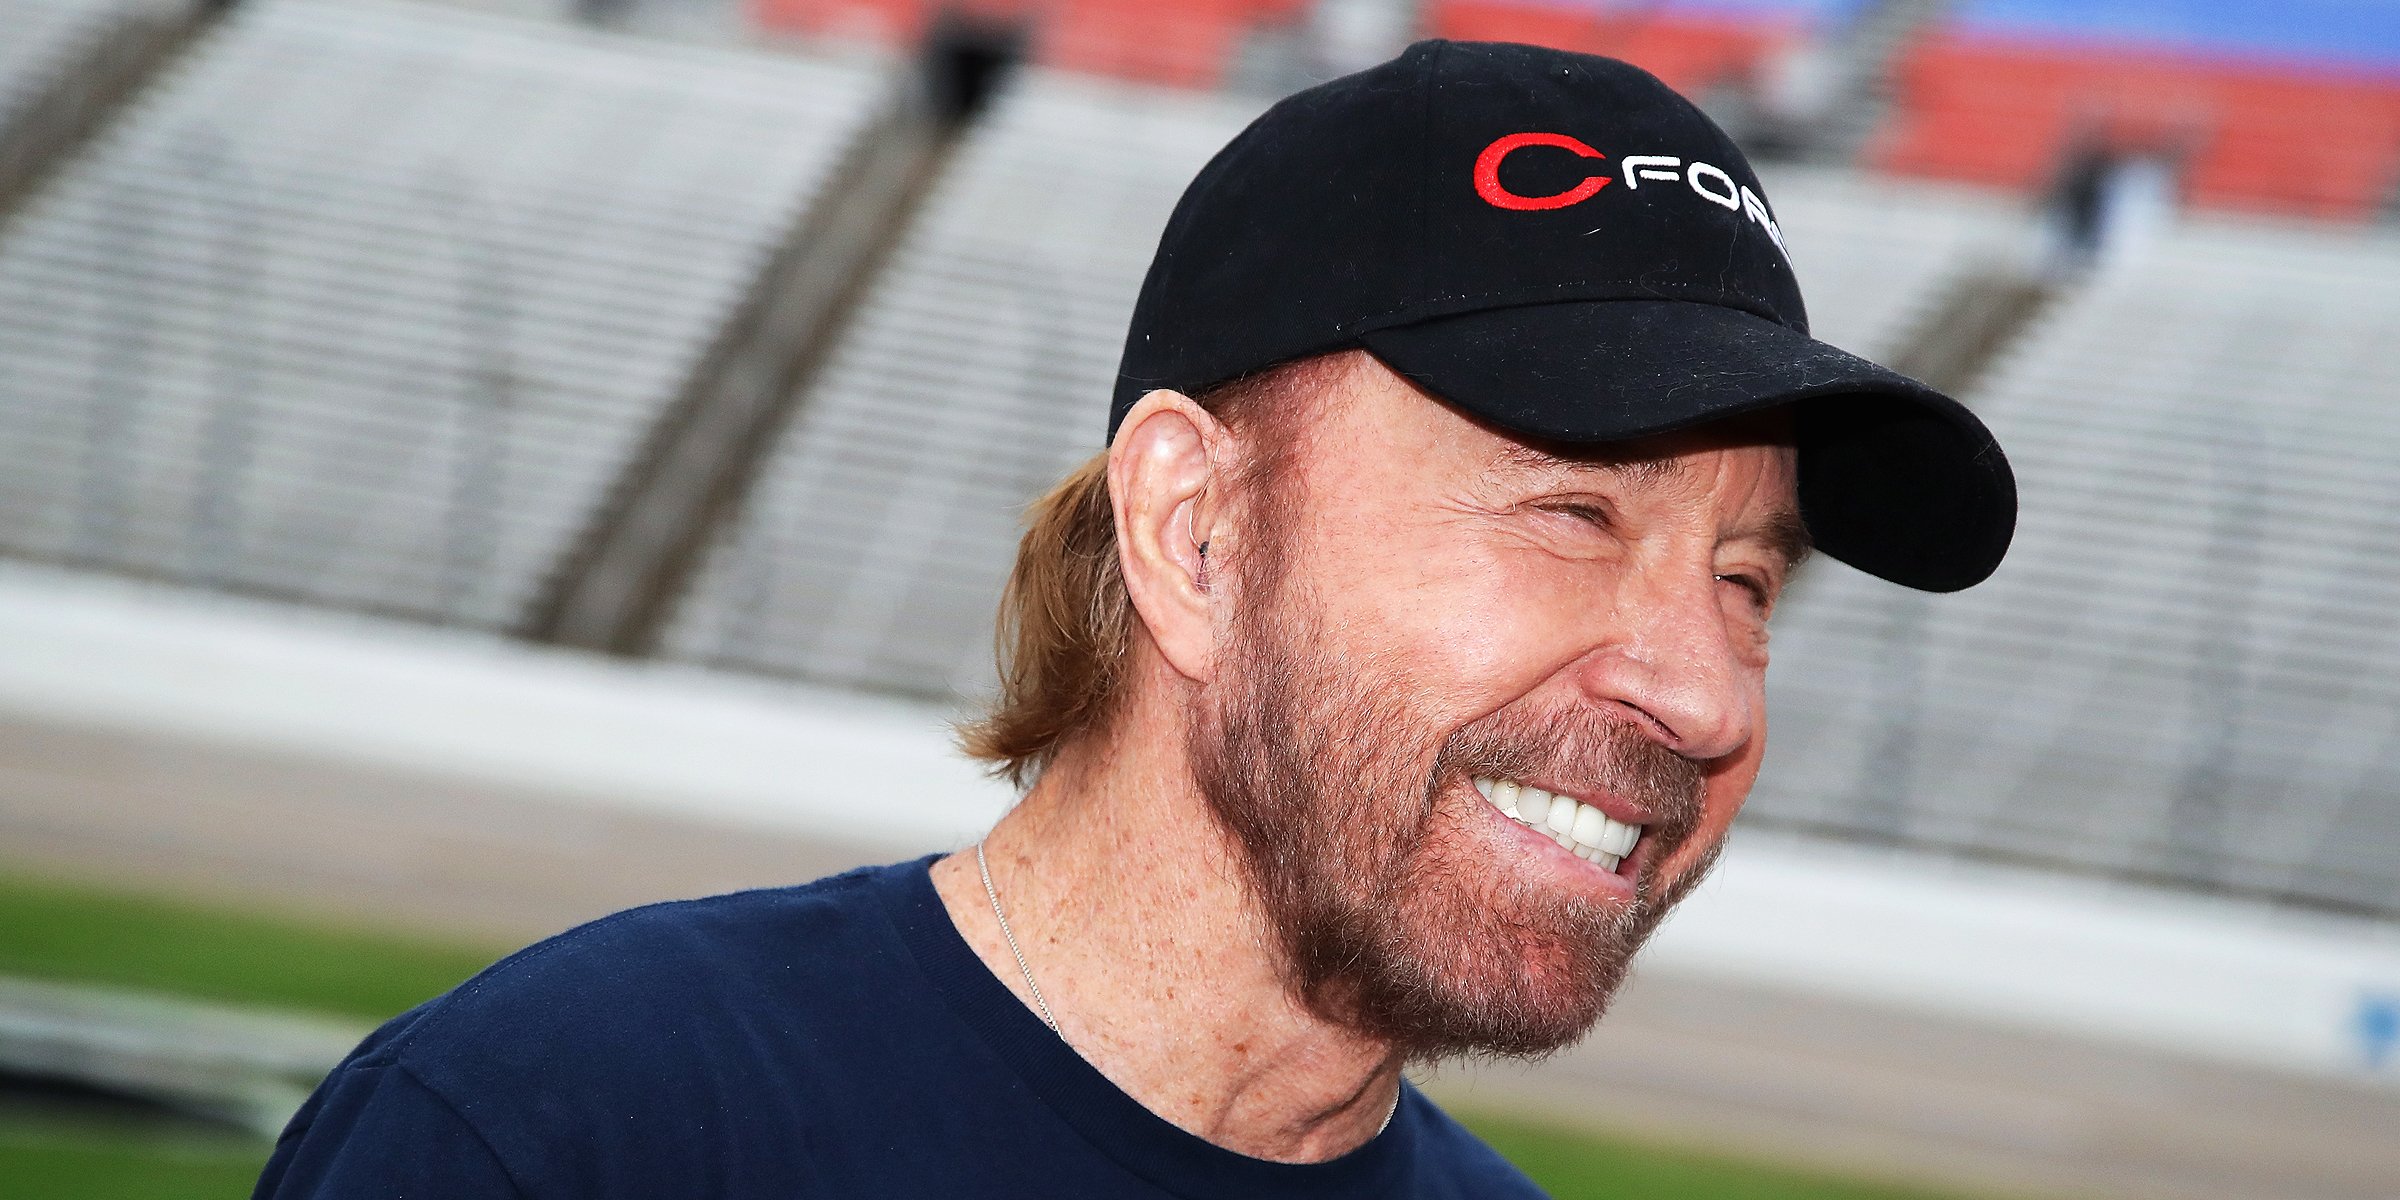 Chuck Norris | Source: Getty Images